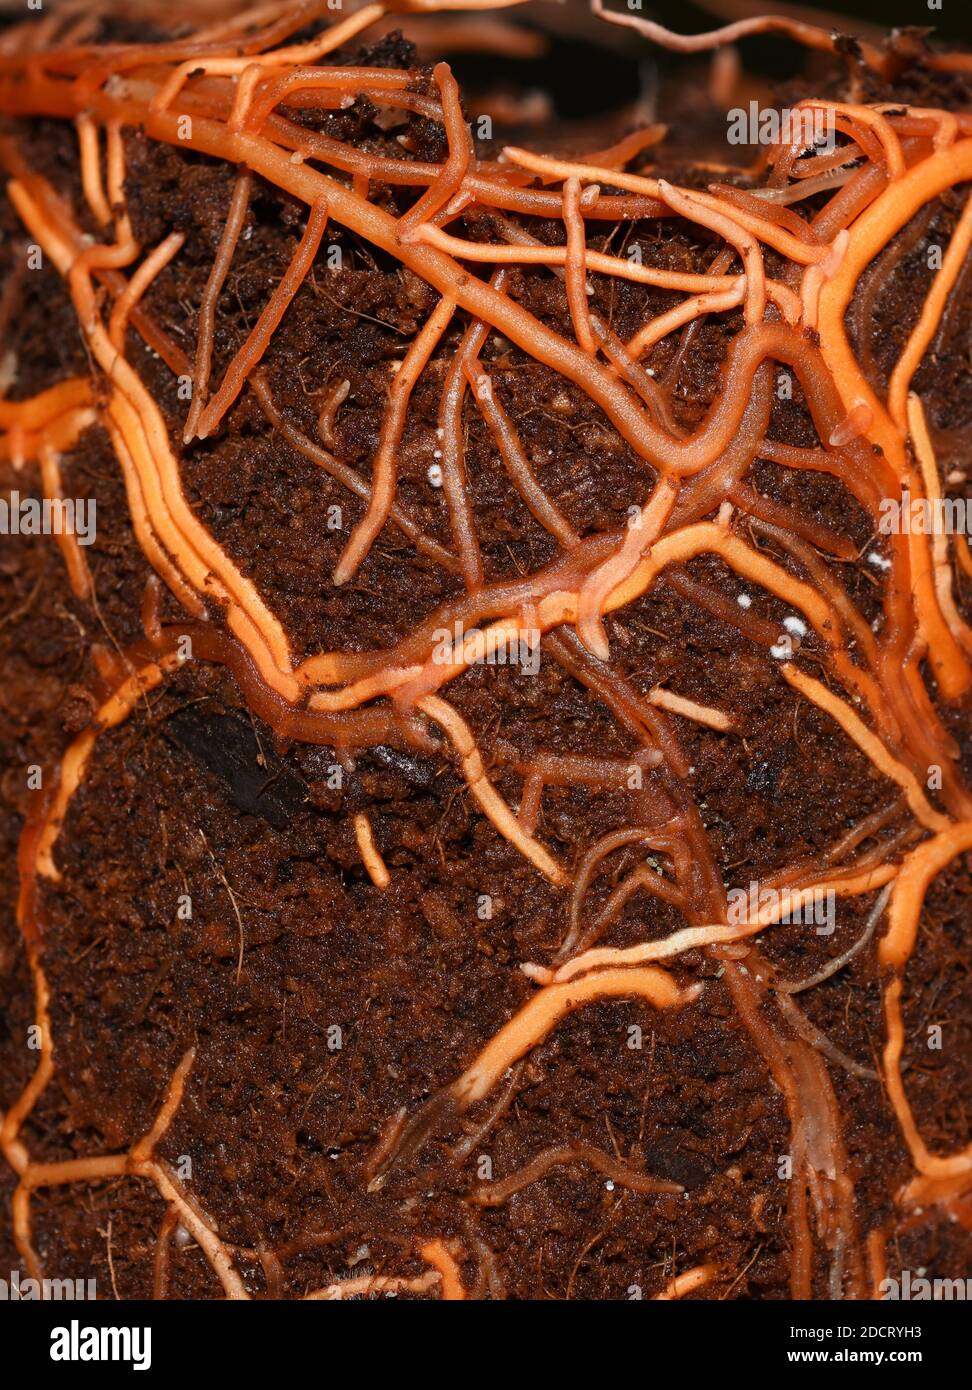 Closeup on plant roots growing underground in soil Stock Photo